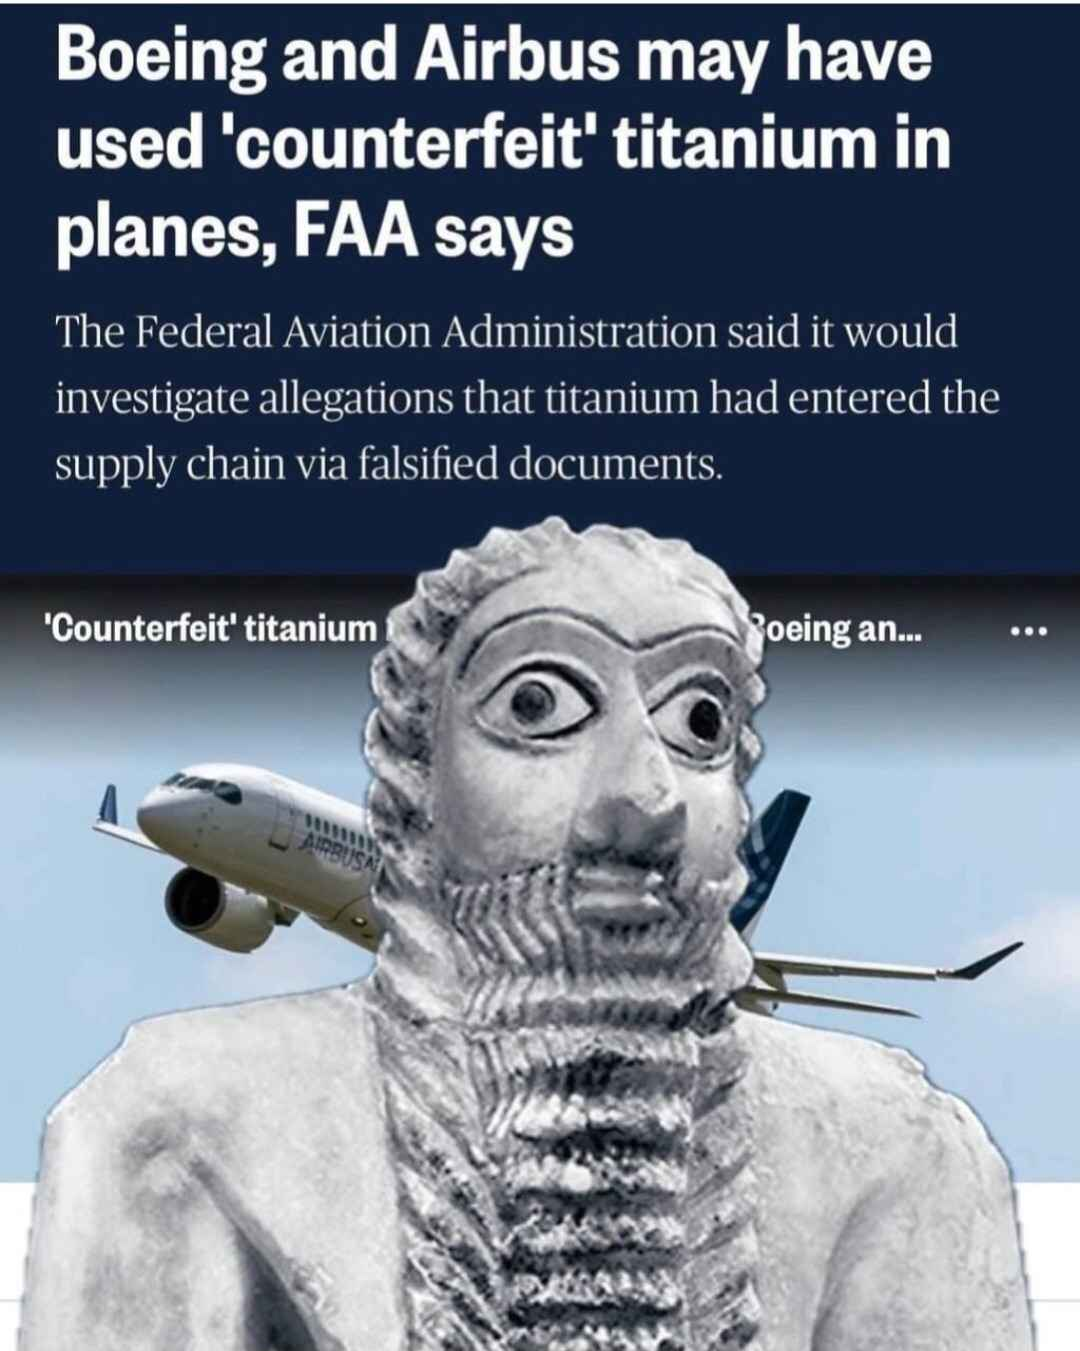 A screenshot of a headline reading "Boeing and Airbus may have used counterfeit titanium in planes, FAA says", with the subheadline "The Federal Aviation Administraion said it would investigate allegations that titanium had entered the supply chain via falsified documents". The image is overlaid with the picture of a statue usually used in modern meme culture to depict Ea-Nasir, the legendary seller of low-quality copper.